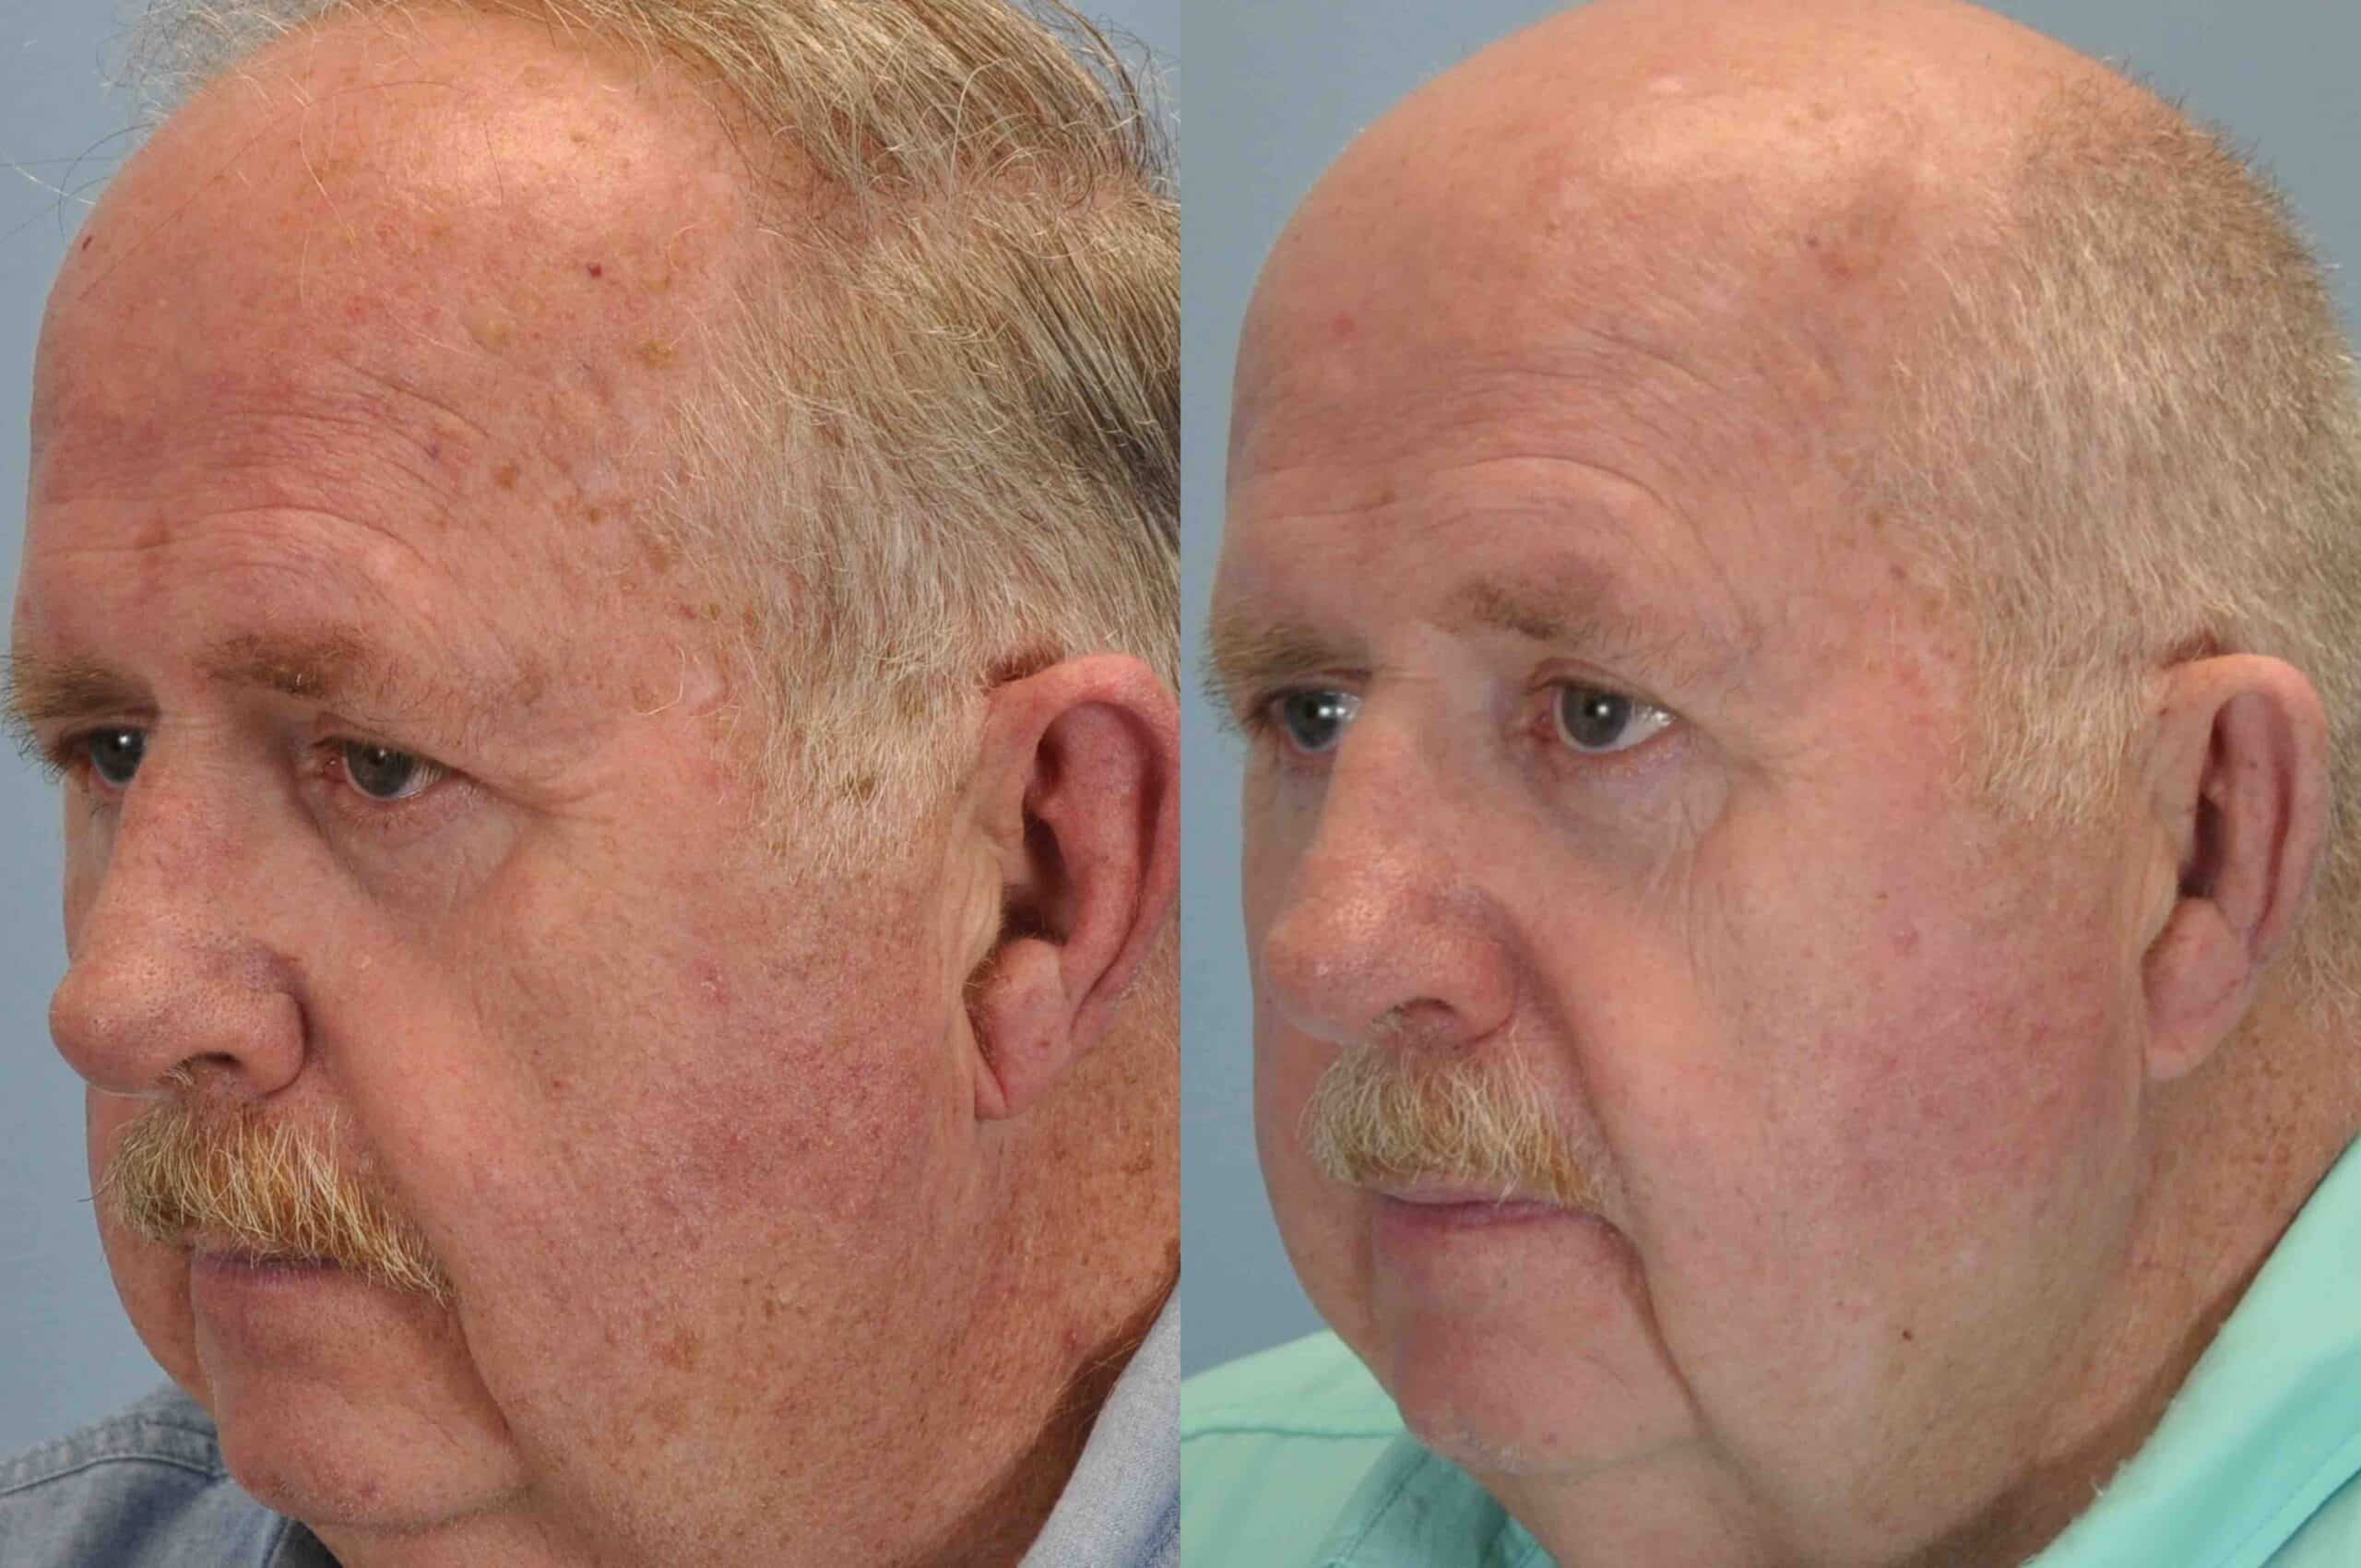 Before and after, 7 mo post-treatment from Laser Resurfacing, Mentor Peel performed by Dr. Paul Vanek (diagonal view)